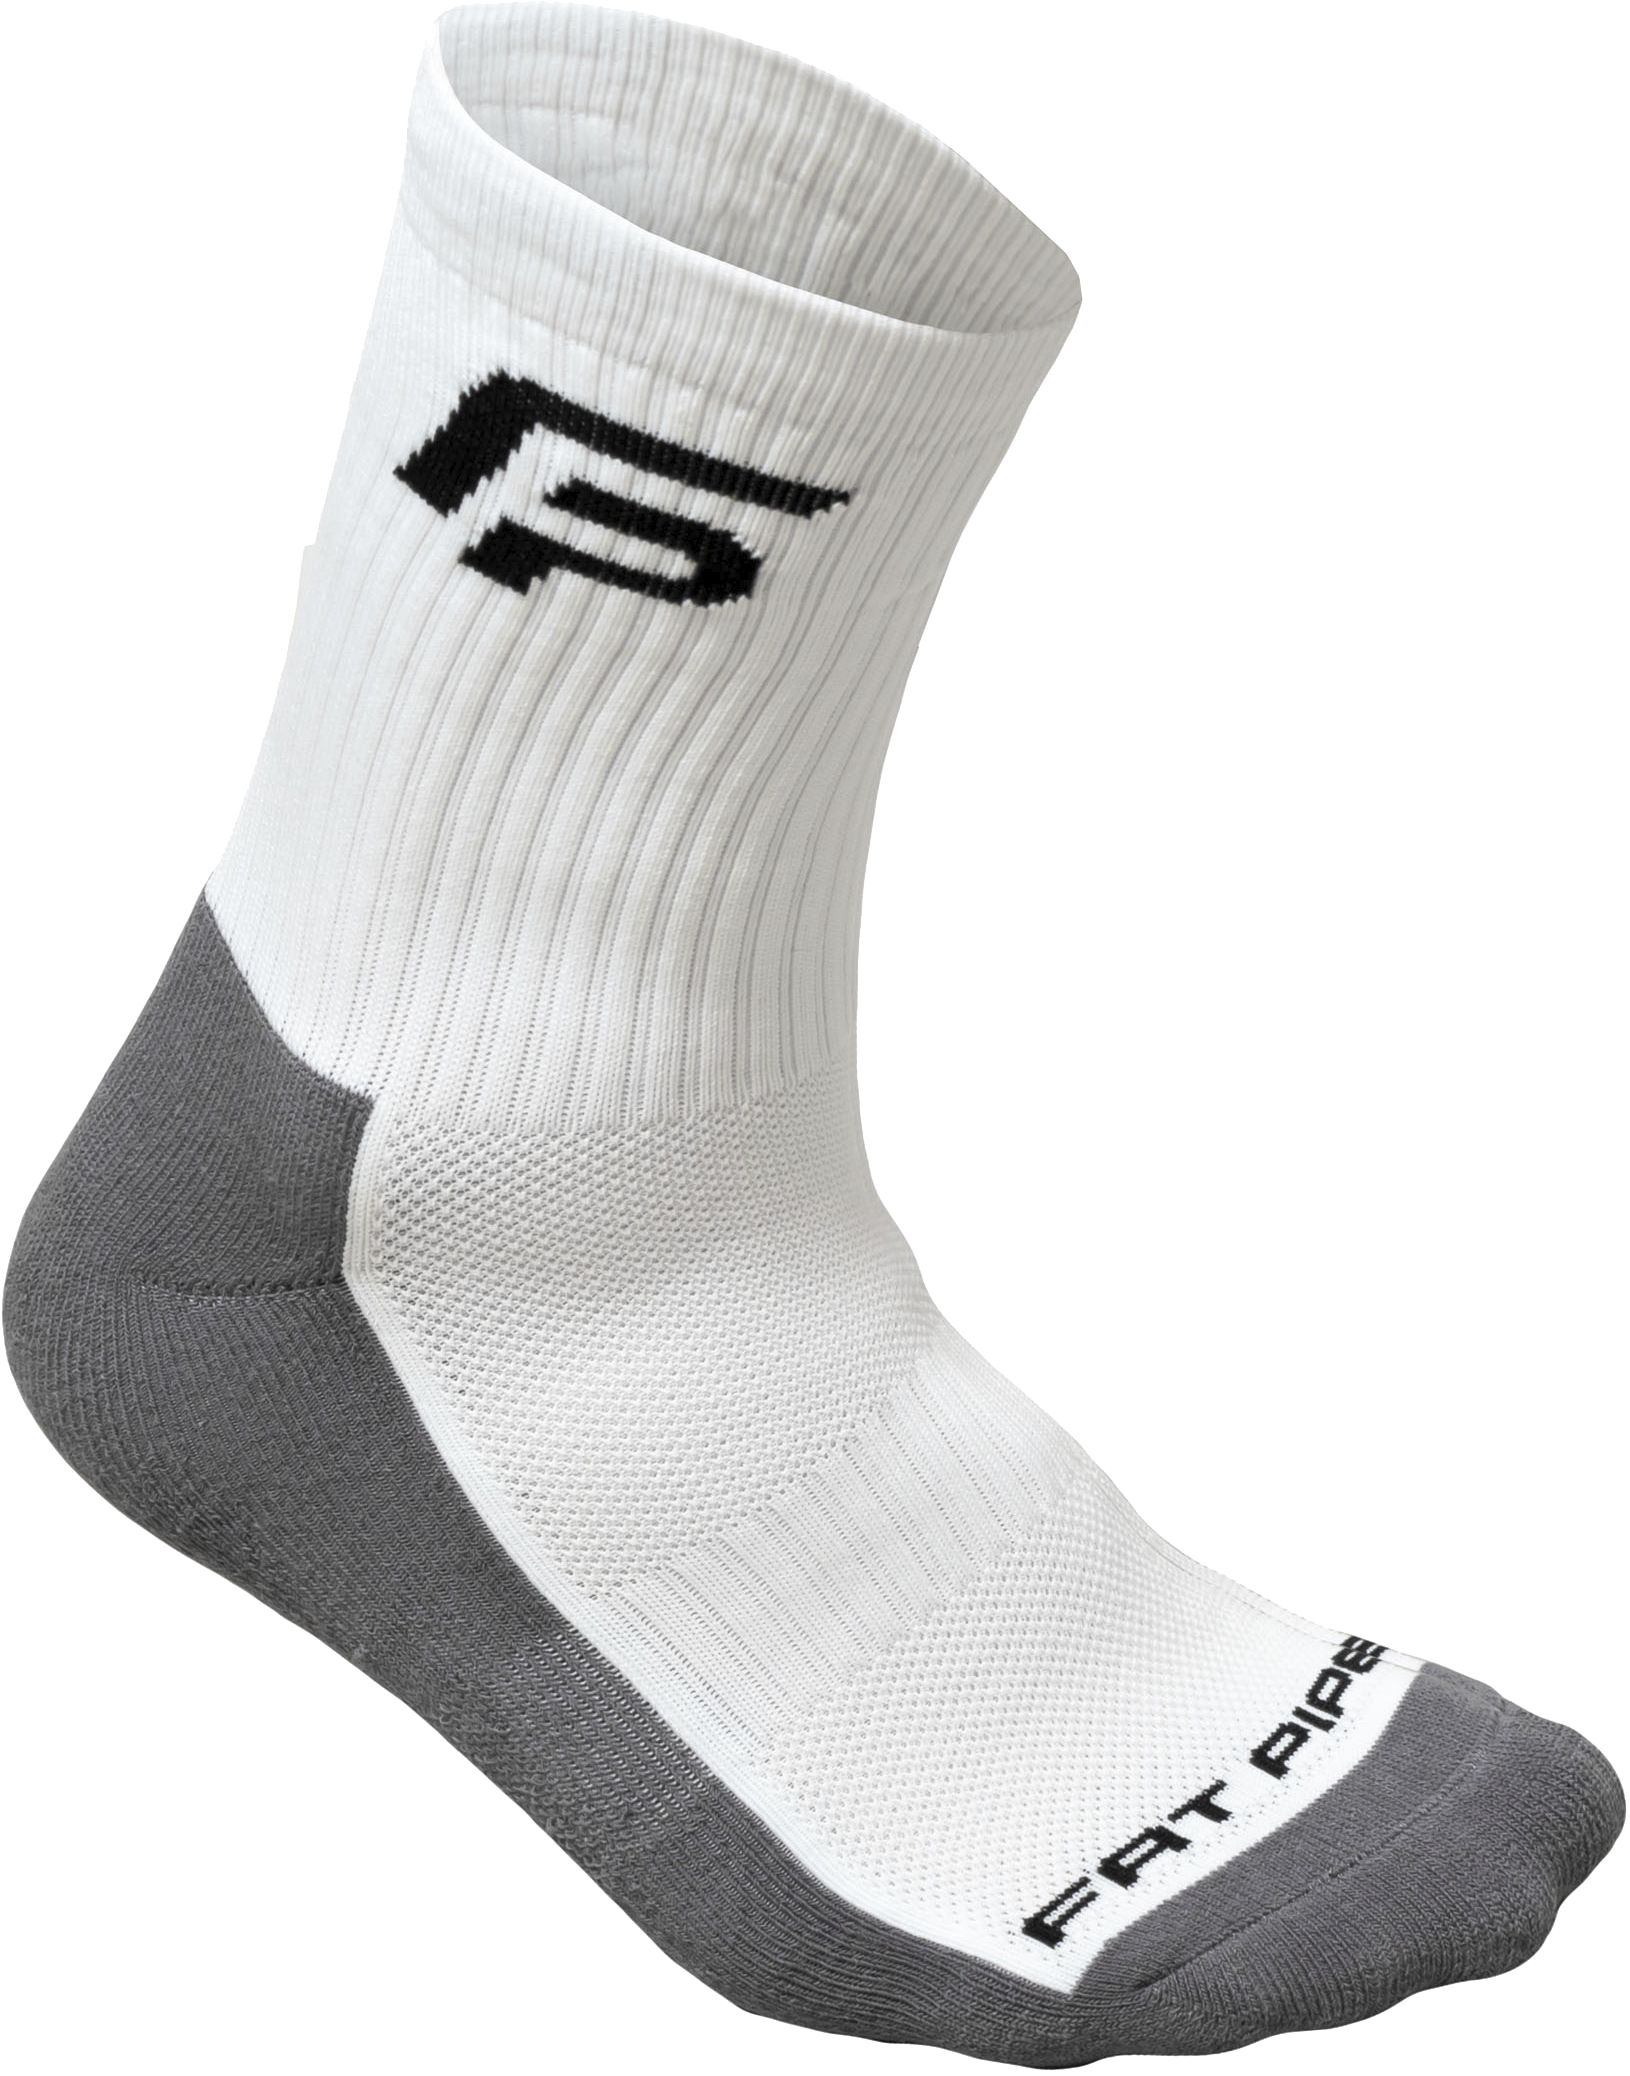 FATPIPE, HECTOR PLAYER CREW SOCKS